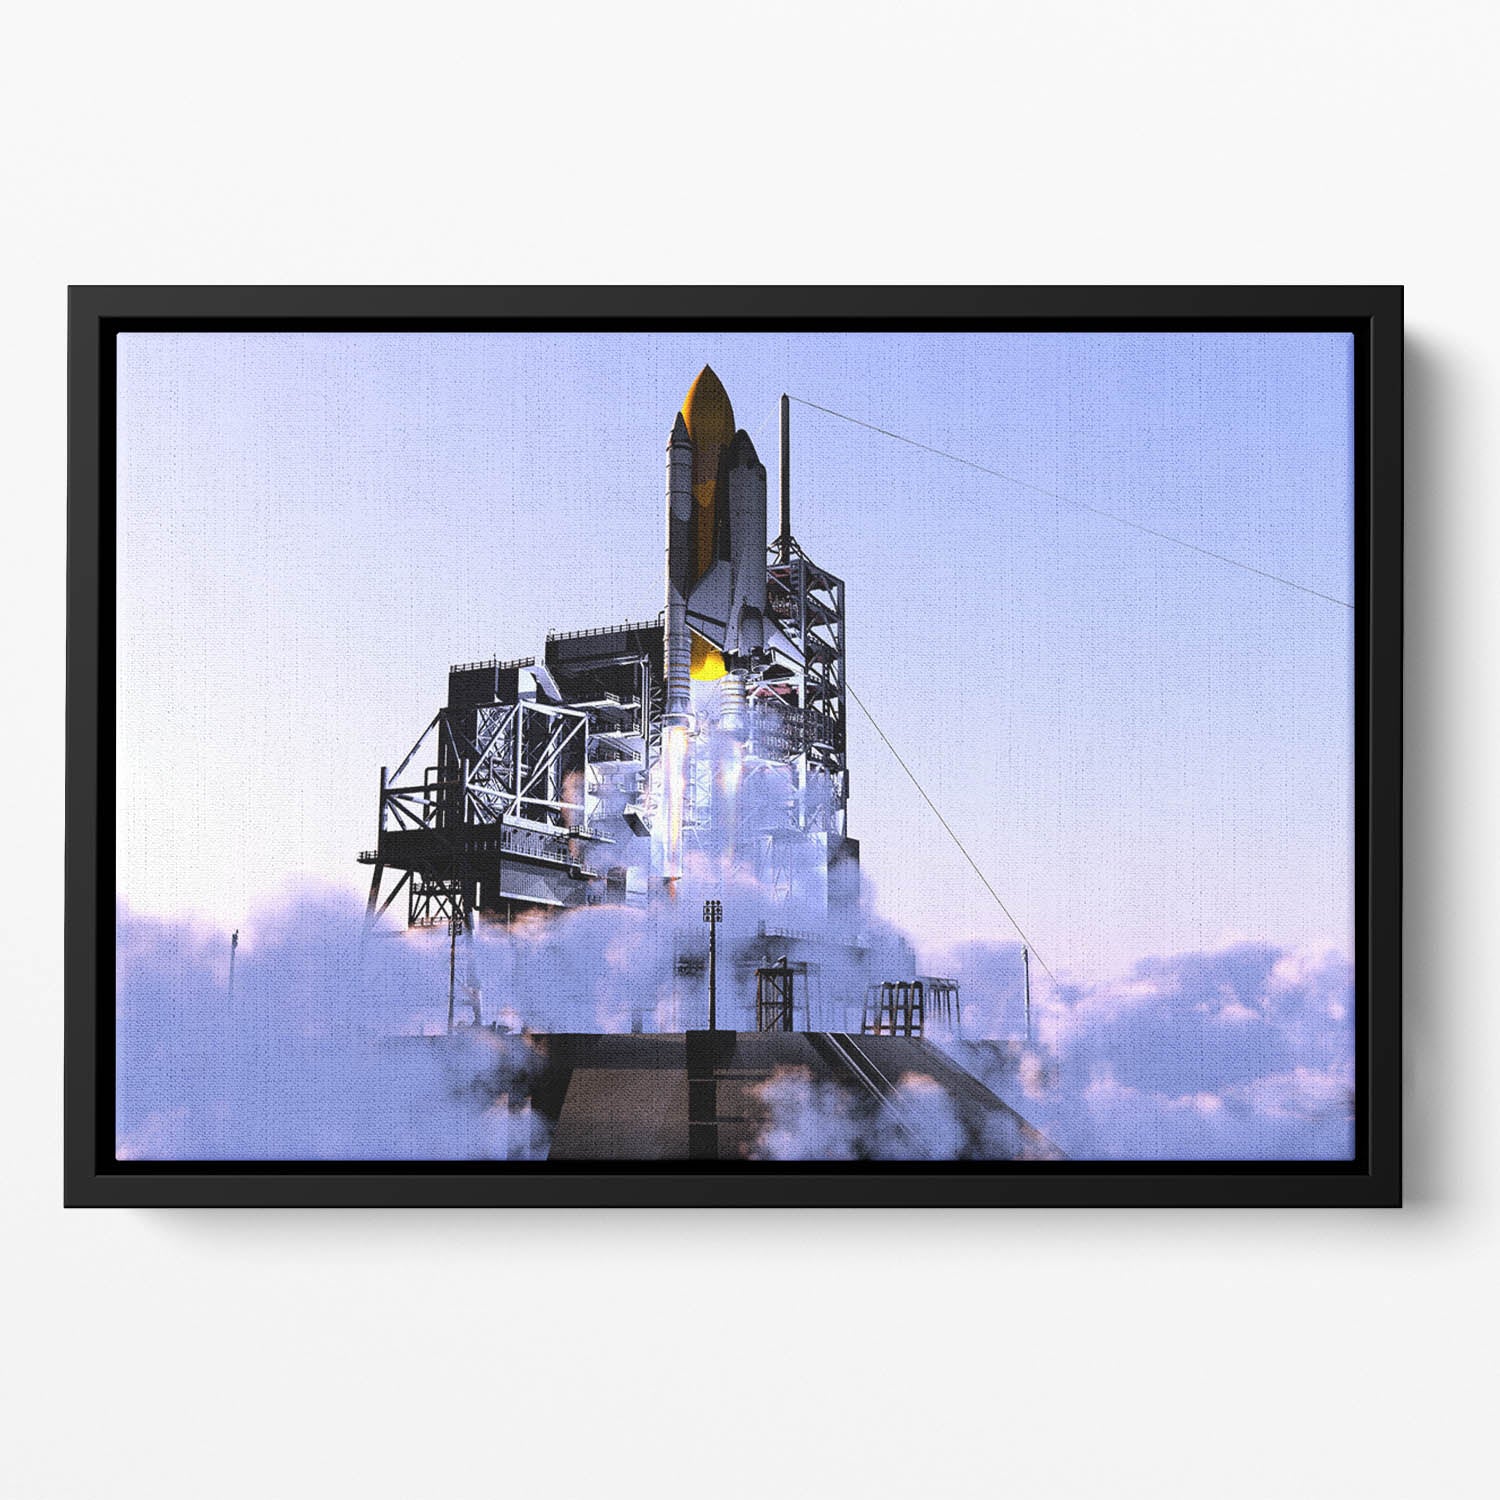 Launch a spacecraft into space Floating Framed Canvas